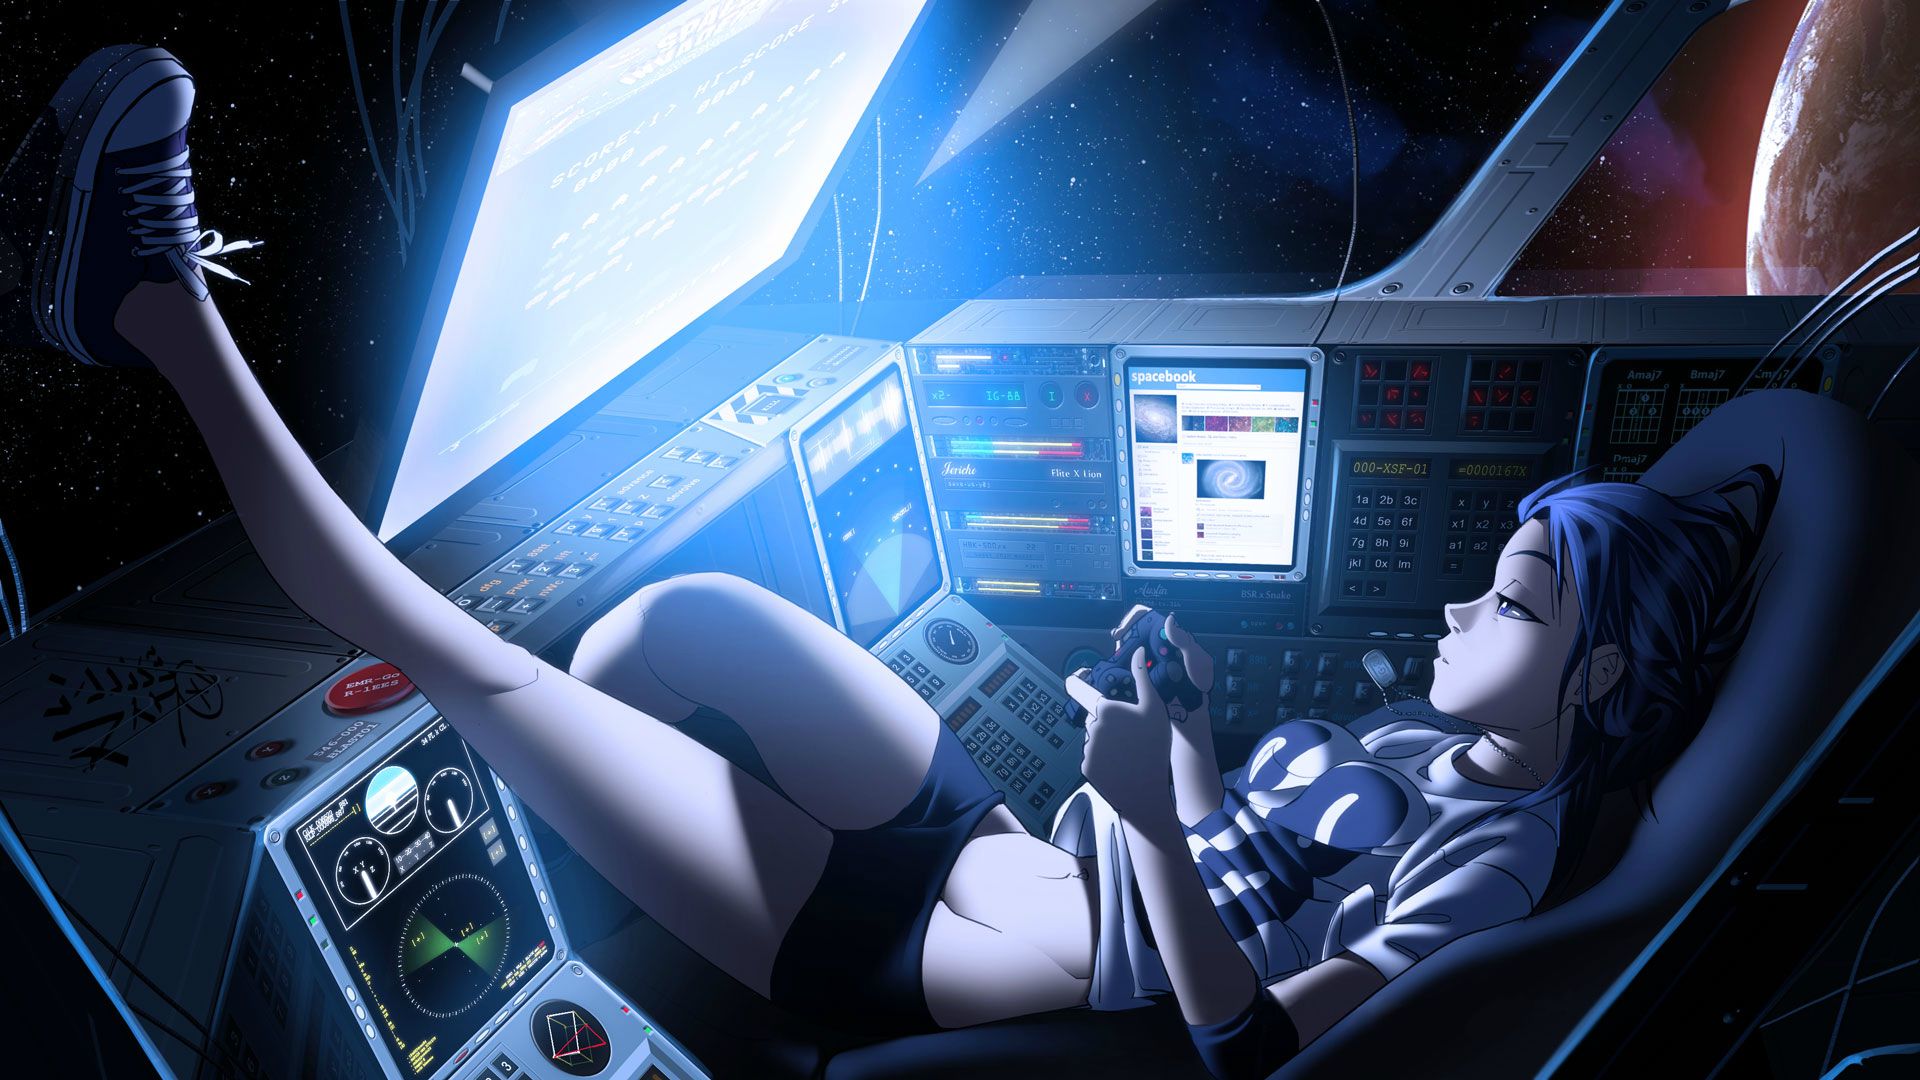 Anime 1920x1080 artwork anime digital art anime girls video games drawing futuristic space space station vashperado PlayStation 3 Space Invaders spaceship zero gravity manga belly cockpit controllers star trails gamers science fiction cyan science fiction women legs Converse